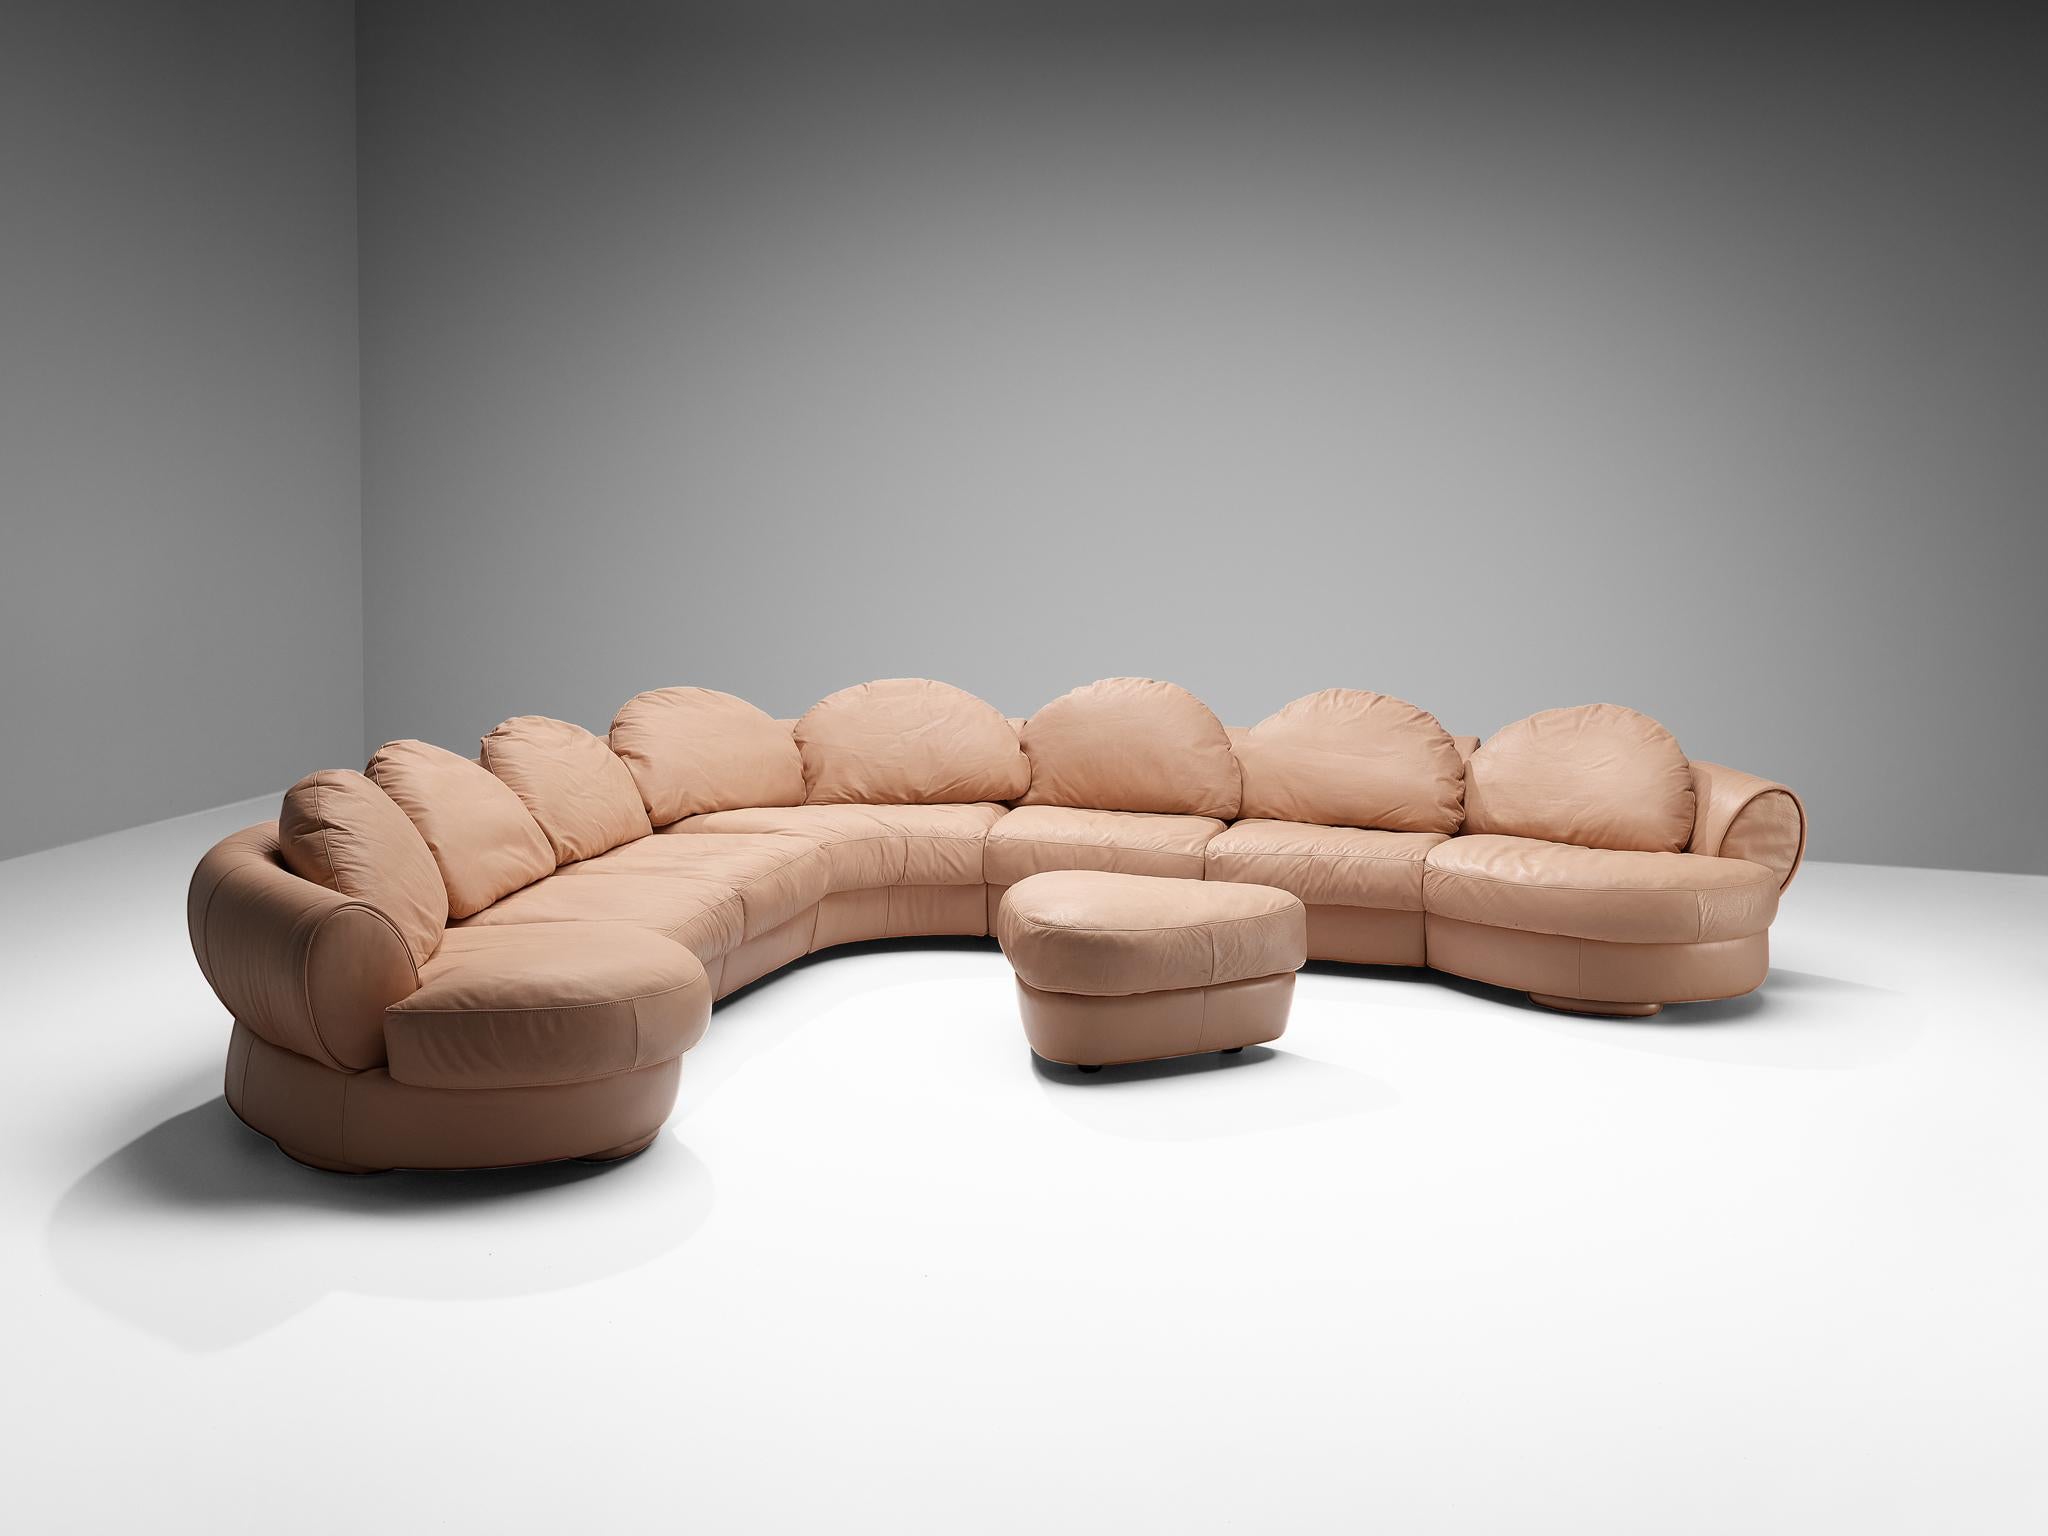 Late 20th Century Wiener Werkstätte 'Attributed' Sectional Sofa in Pink Orange Leather  For Sale